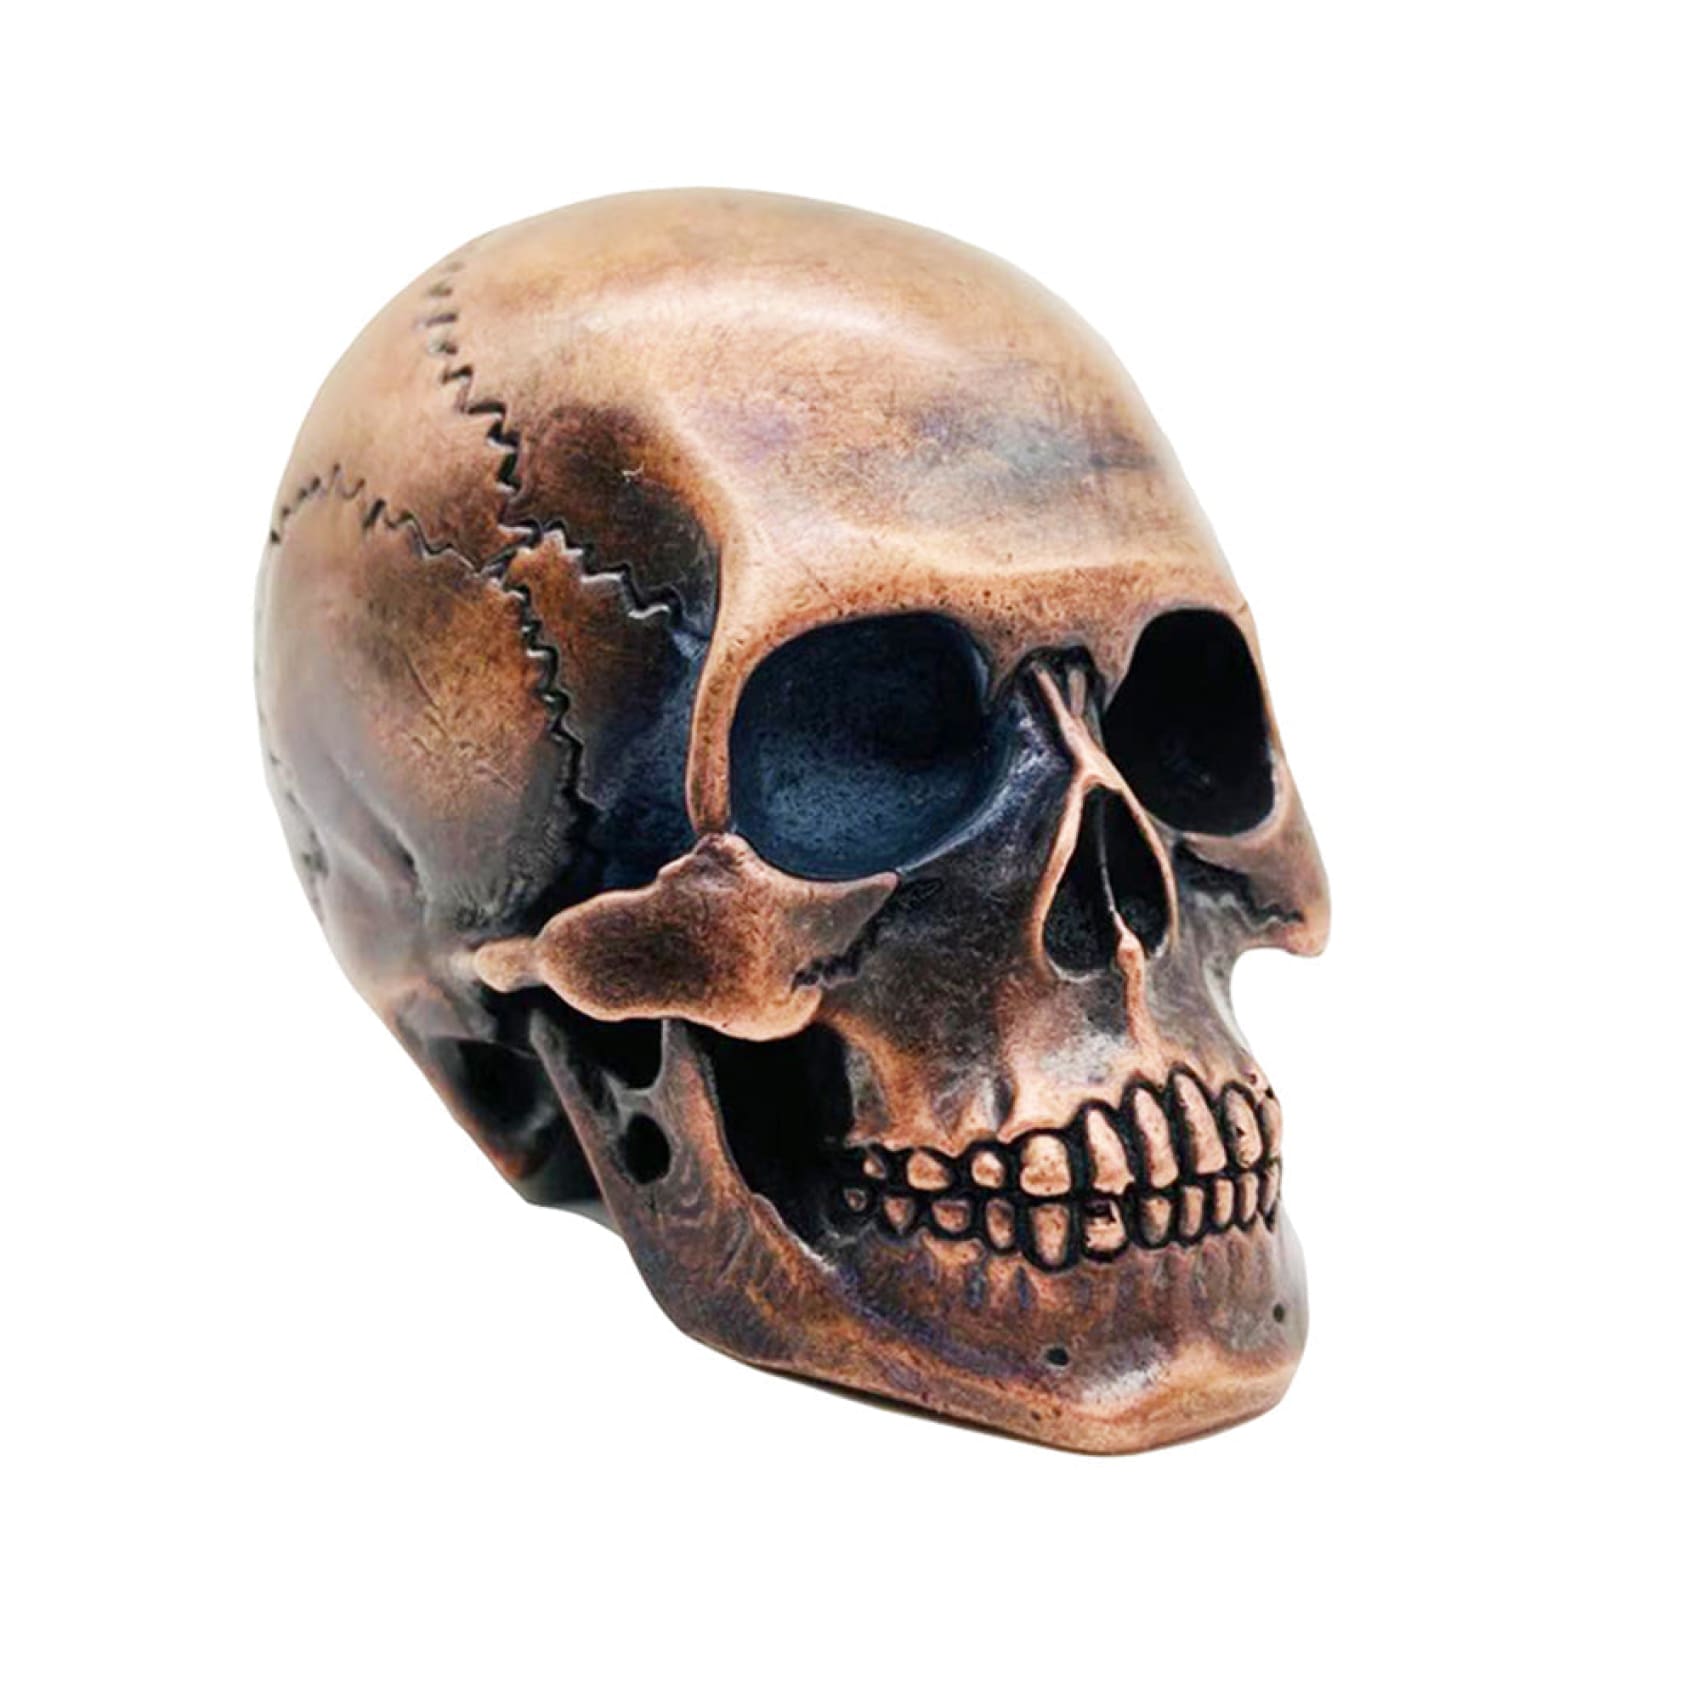 Skull Ornament For Club,Office,House Decoration,Figure Gifts,Solid Copper